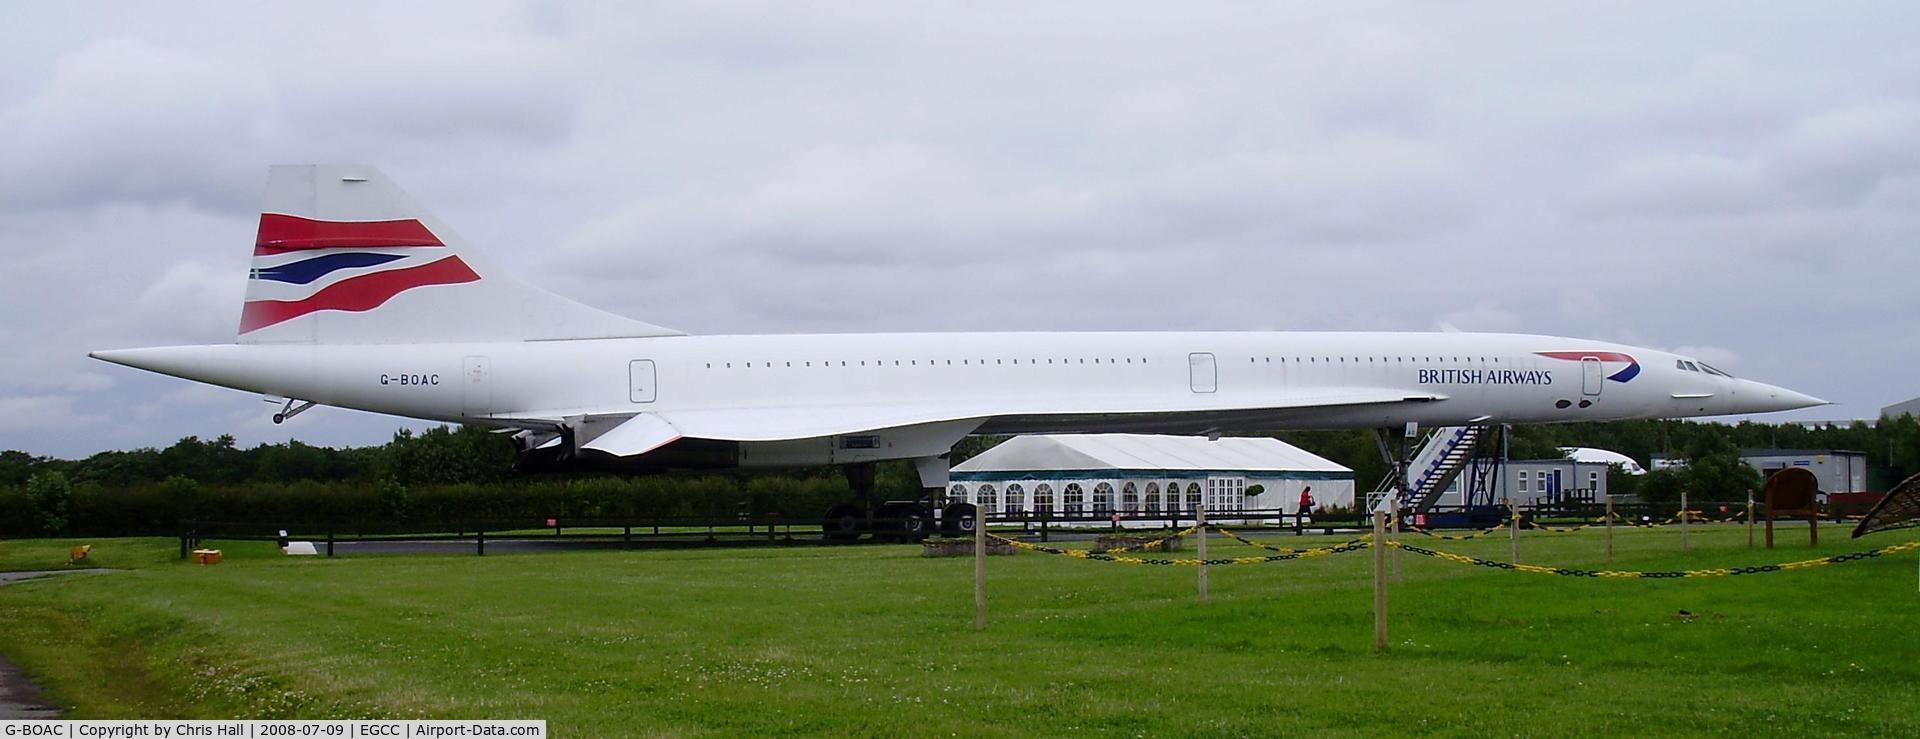 G-BOAC, 1975 Aerospatiale-BAC Concorde 1-102 C/N 100-004, on display at the viewing area at Manchester Airport